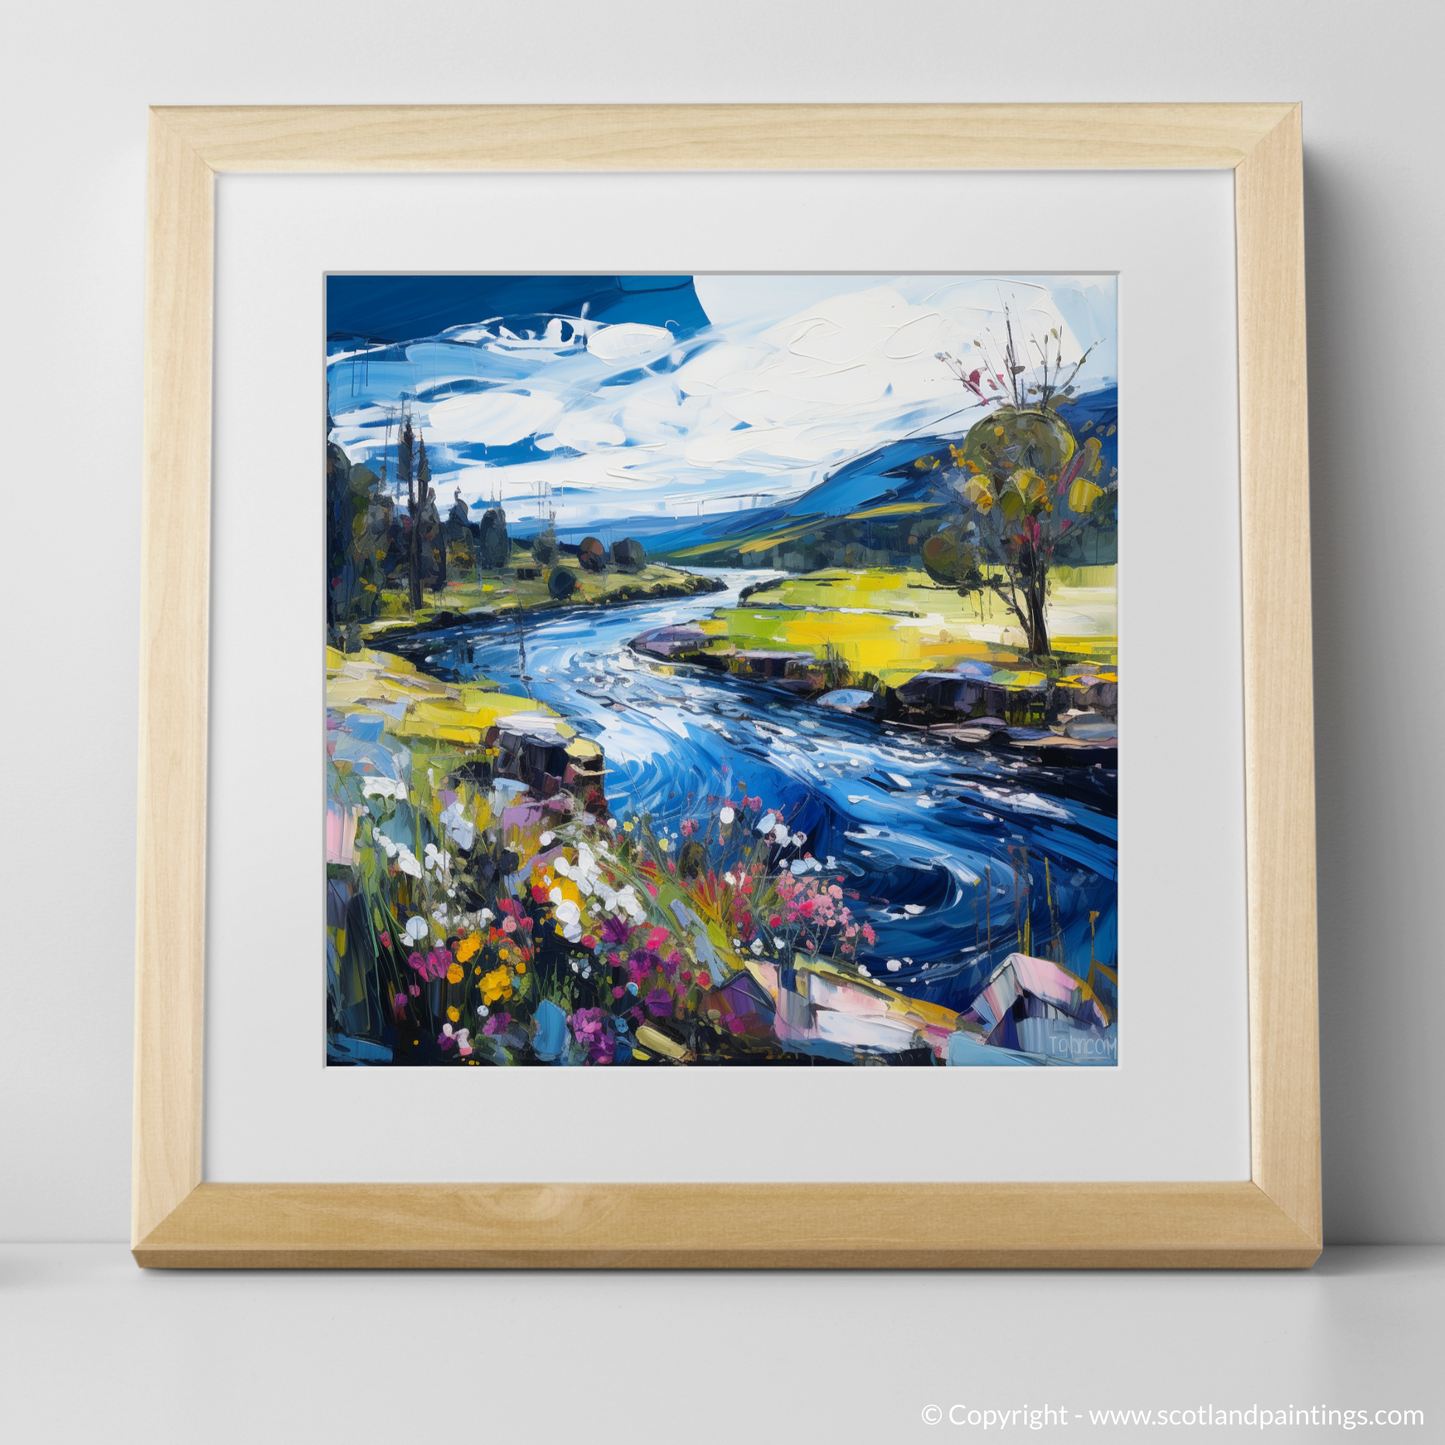 Painting and Art Print of River Carron, Ross-shire. Carron's Rhapsody: An Expressionist Ode to the Highlands.